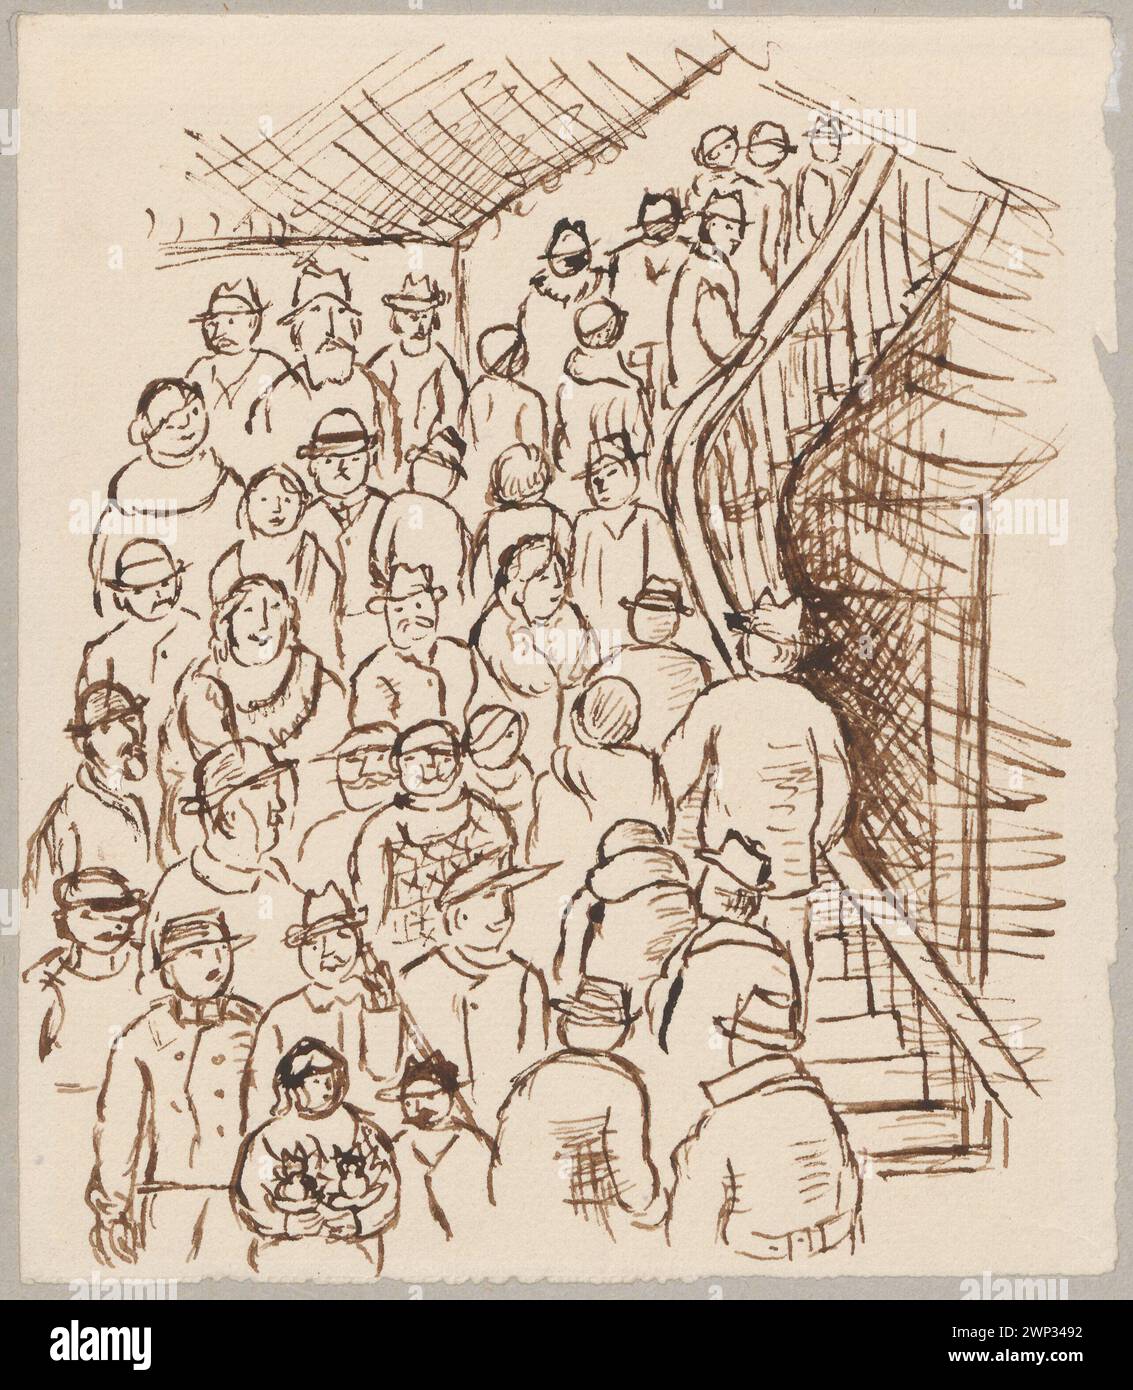 Anthill - sight of the stairs, from the series 'Auction in Hôtel Droouot'; Makowski, Tadeusz (1882-1932); 1931-1932 (1931-00-00-1932-00-00);Hôtel Drouot (Paris - auction house - 1852-), generic scenes in the interior, purchase (provenance) Stock Photo